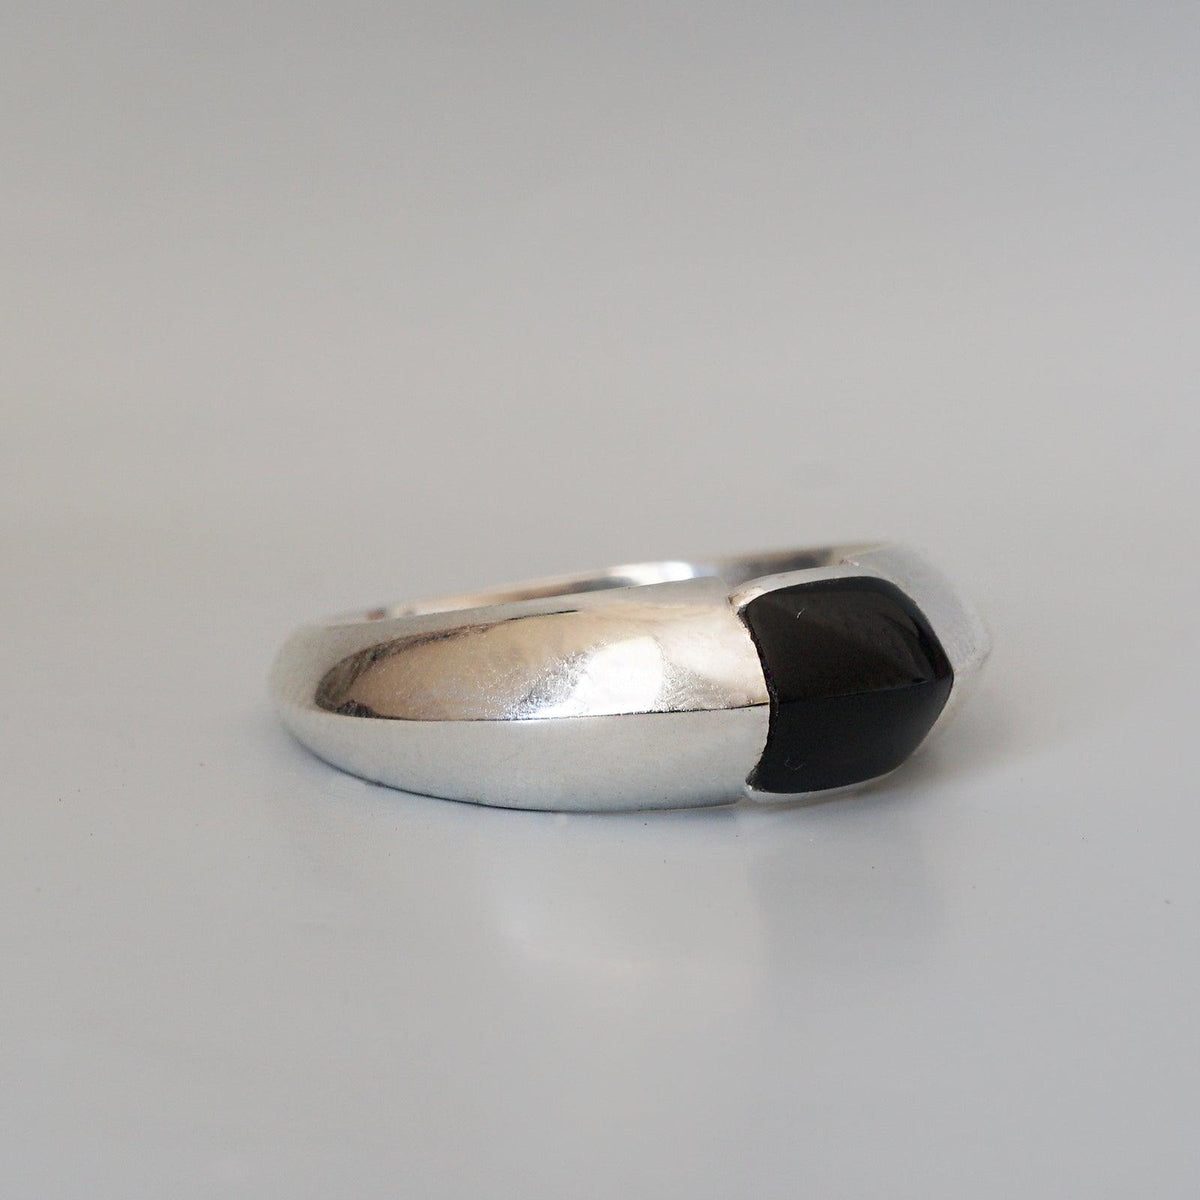 Black Onyx Bevel Ring in Sterling Silver and 14K Gold, 7mm - Tippy Taste Jewelry